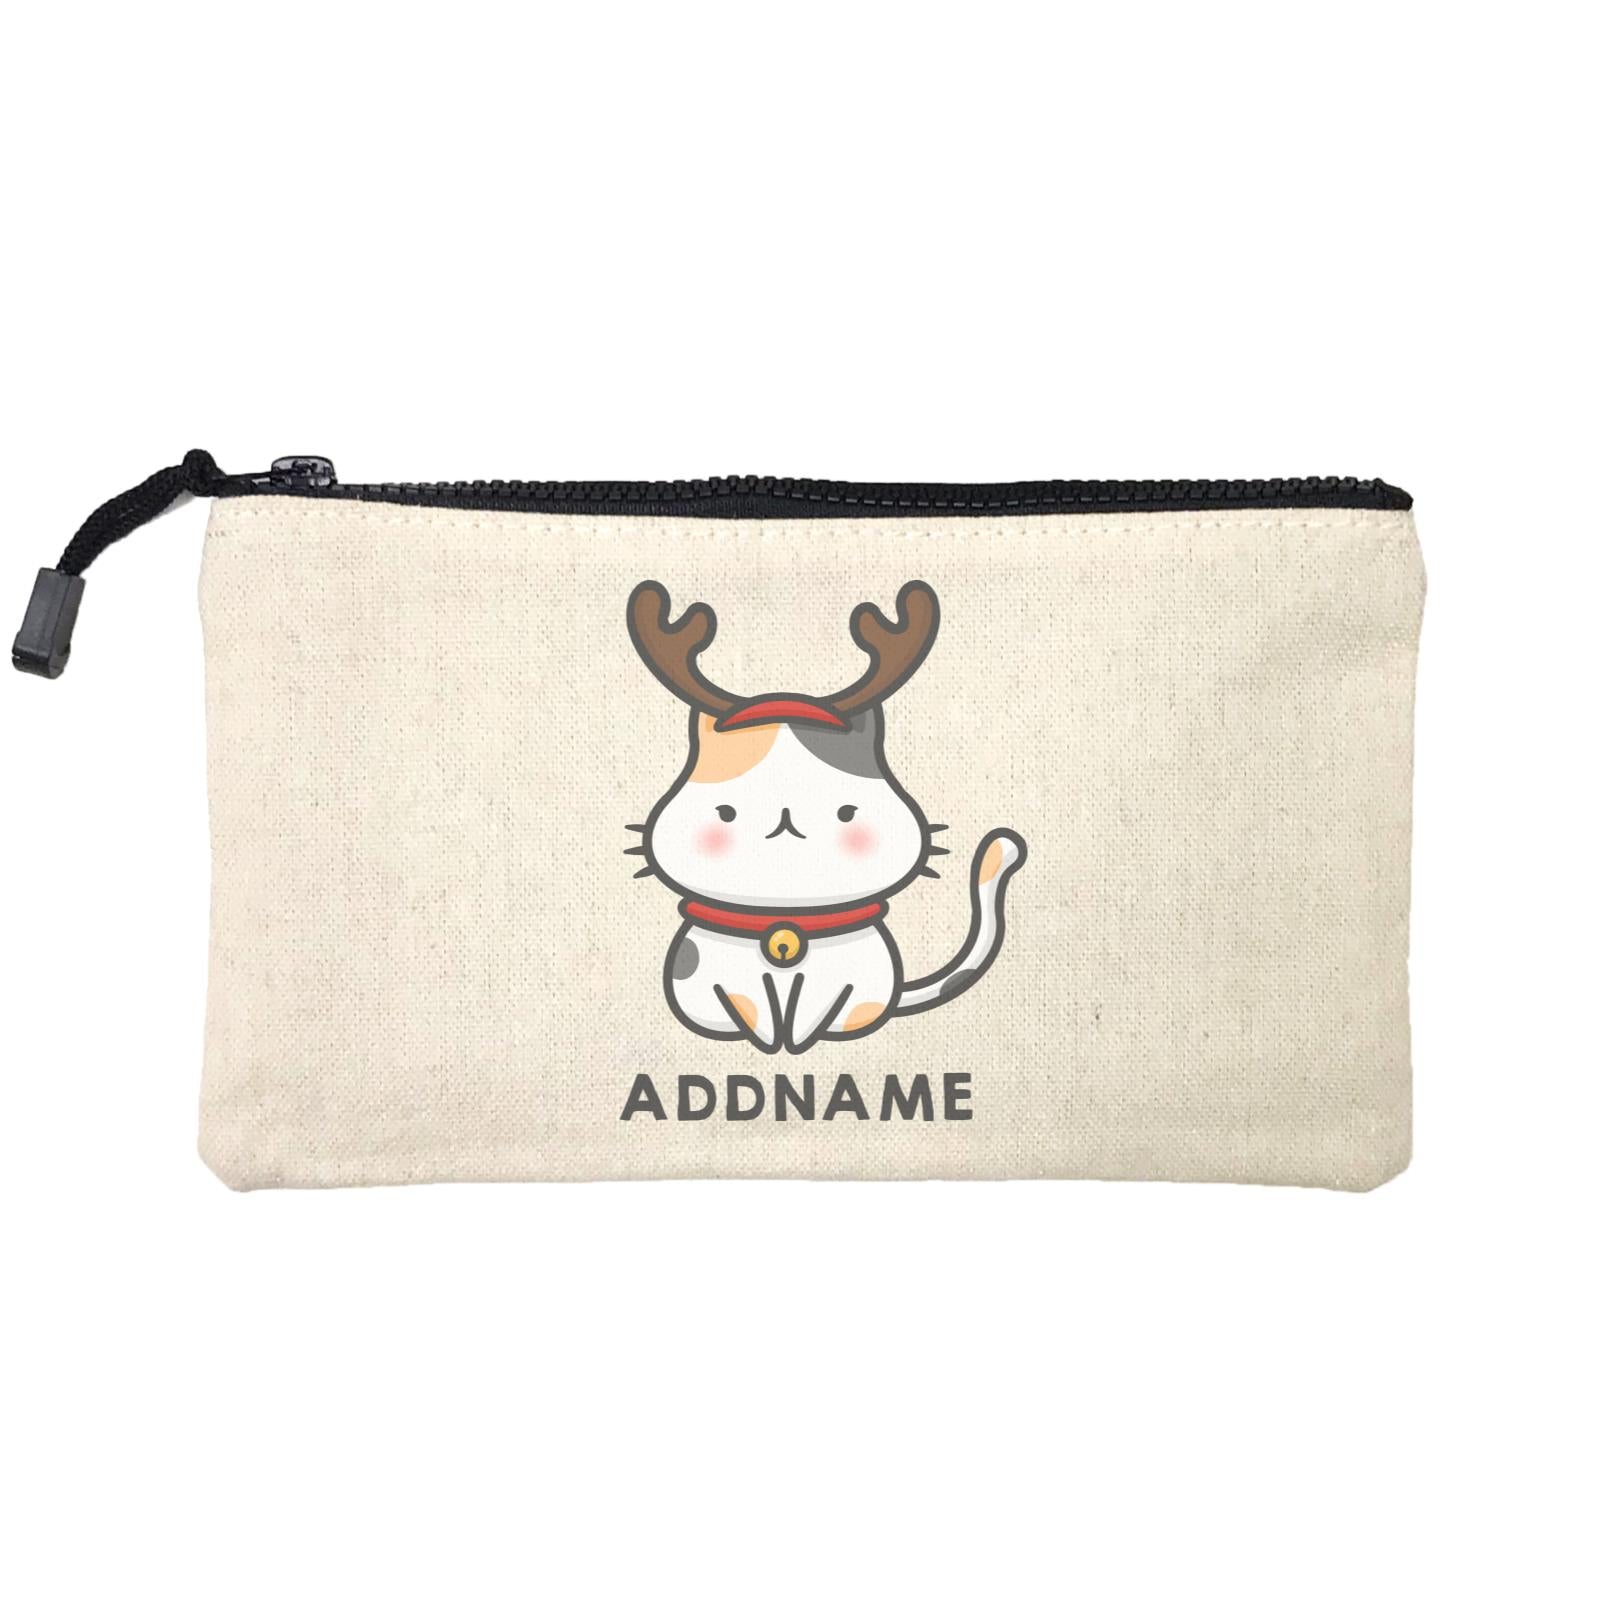 Xmas Cute Cat With Reindeer Antlers Addname Mini Accessories Stationery Pouch